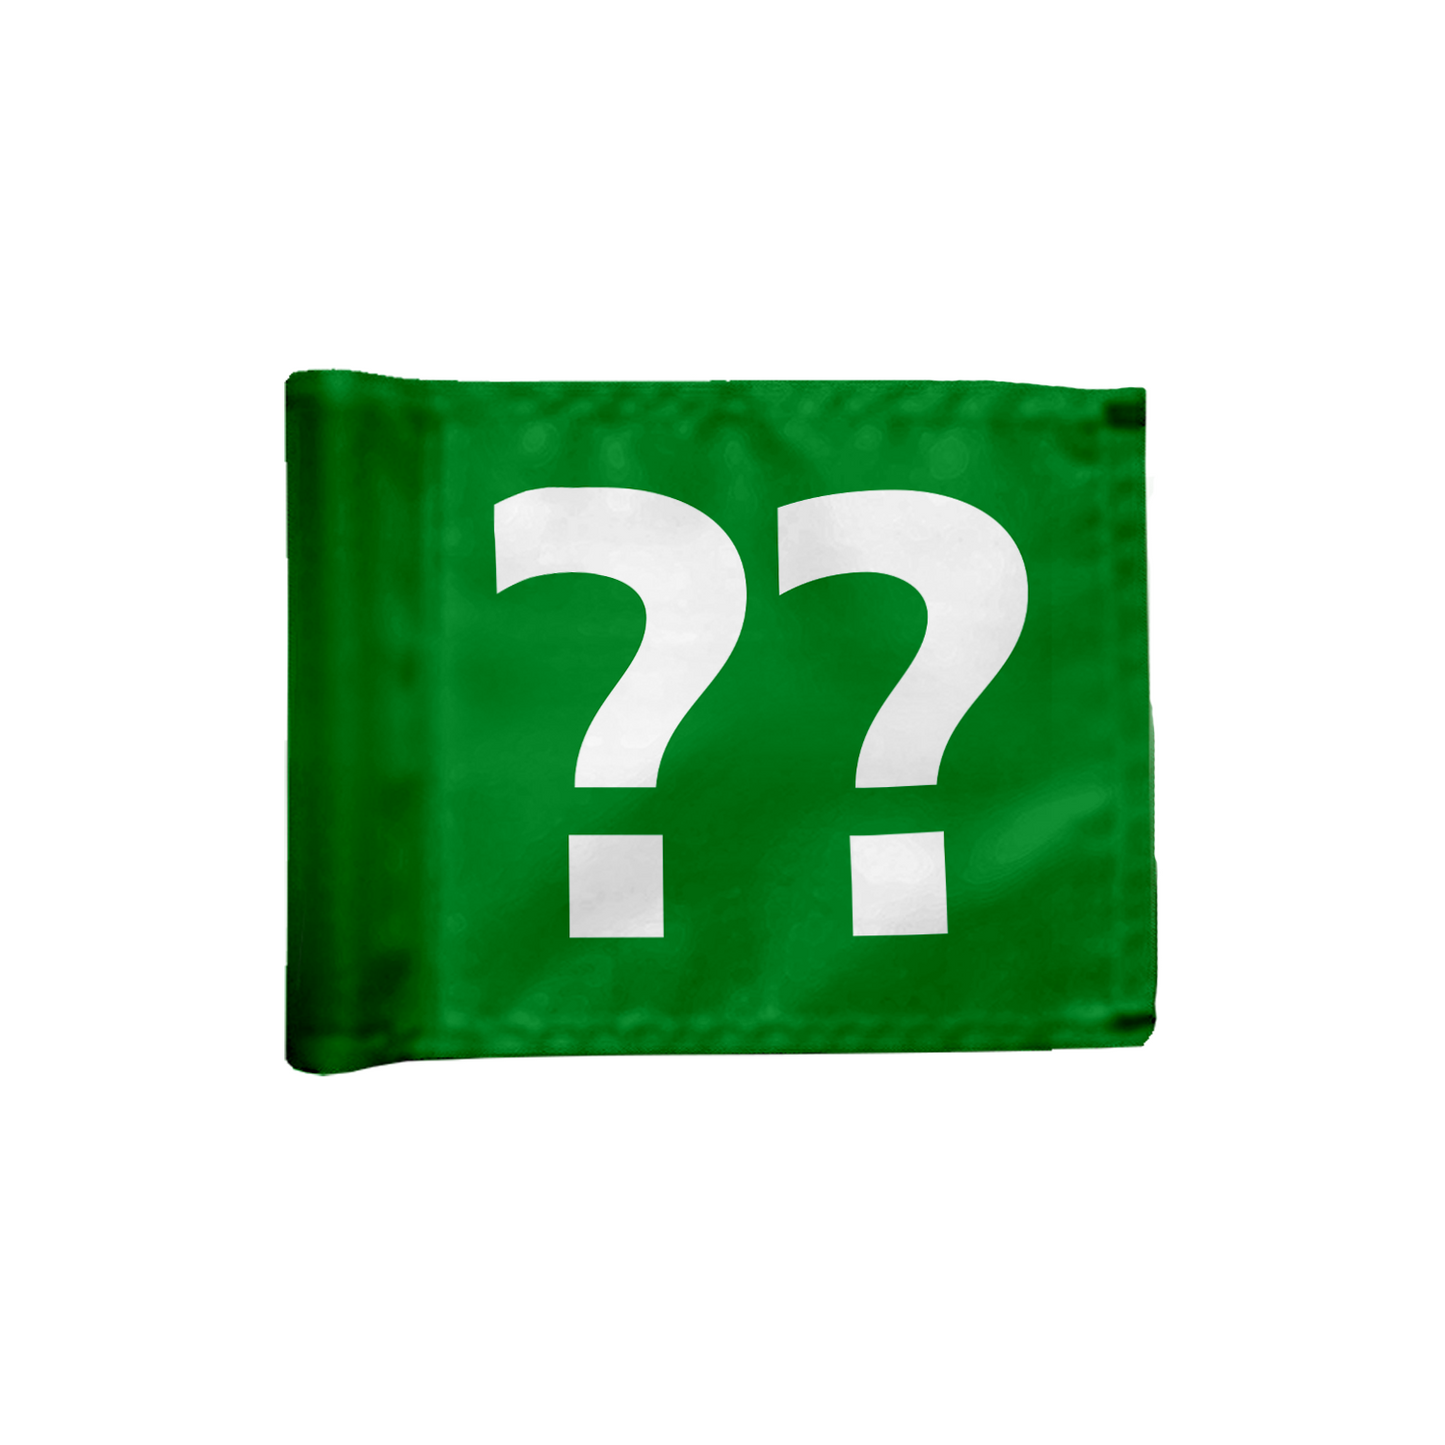 Single puttinggreen flag, one-sided, green with optional hole number, 200 gram fabric